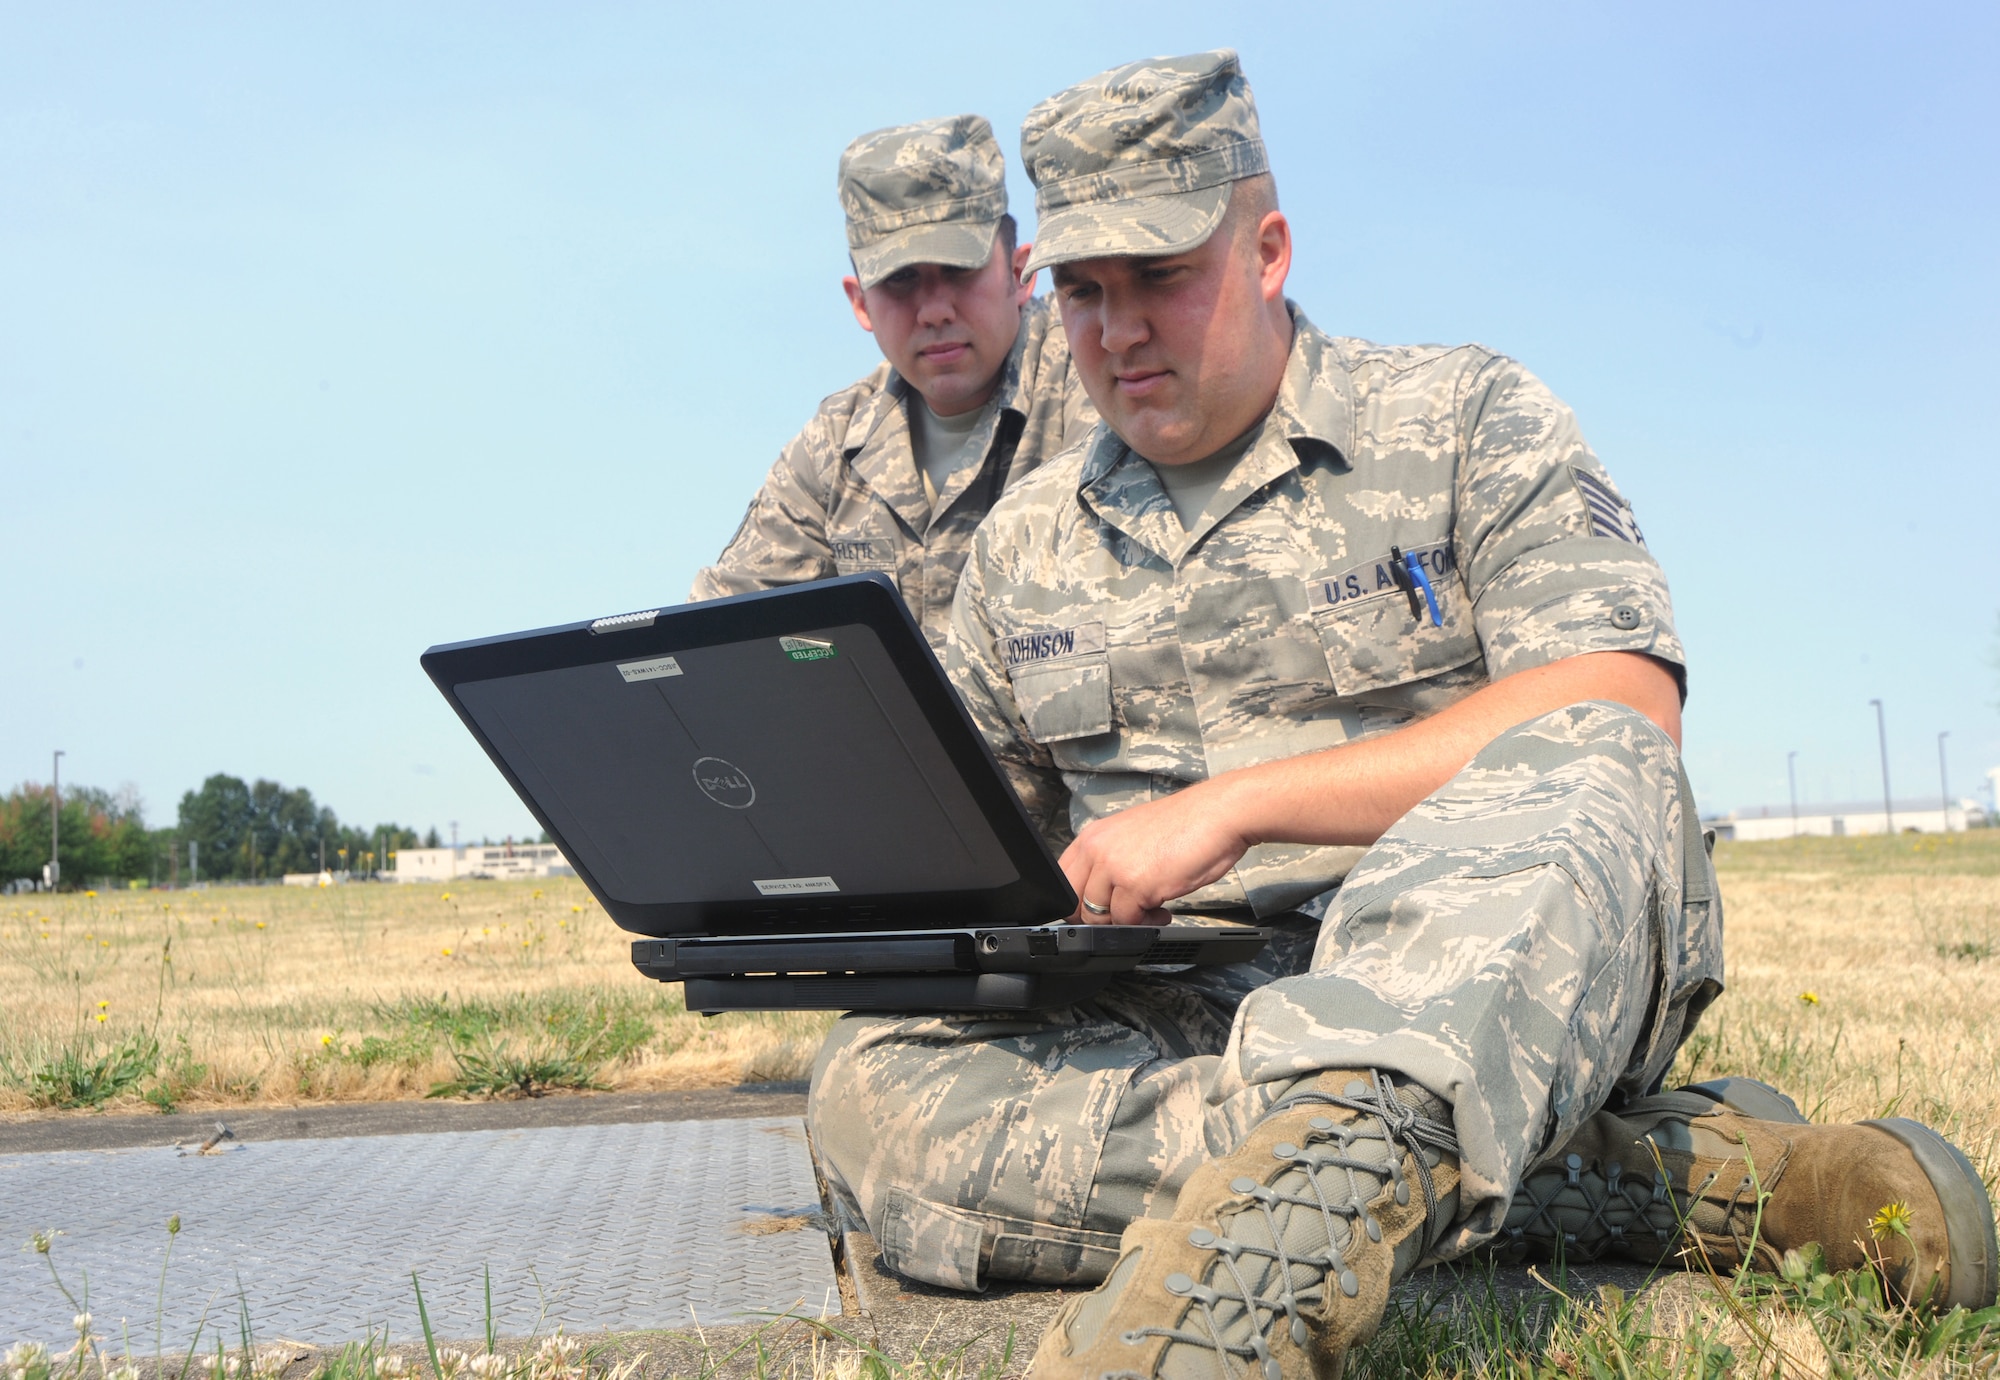 Oregon Air National Guardsmen Tech. Sgt. Matthew Shifflette, left, and Tech. Sgt. Mark (Gus) Johnson, right, use a laptop computer to continue their work after a building evacuation drill during an exercise conducted by the Wing Inspection Team, Aug. 2, 2014. Both Shifflette and Johnson are maintenance specialist assigned to the 142nd Fighter Wing Commutations Flight. (U.S. Air National Guard photo by Tech. Sgt. John Hughel, 142nd Fighter Wing Public Affairs/Released)

